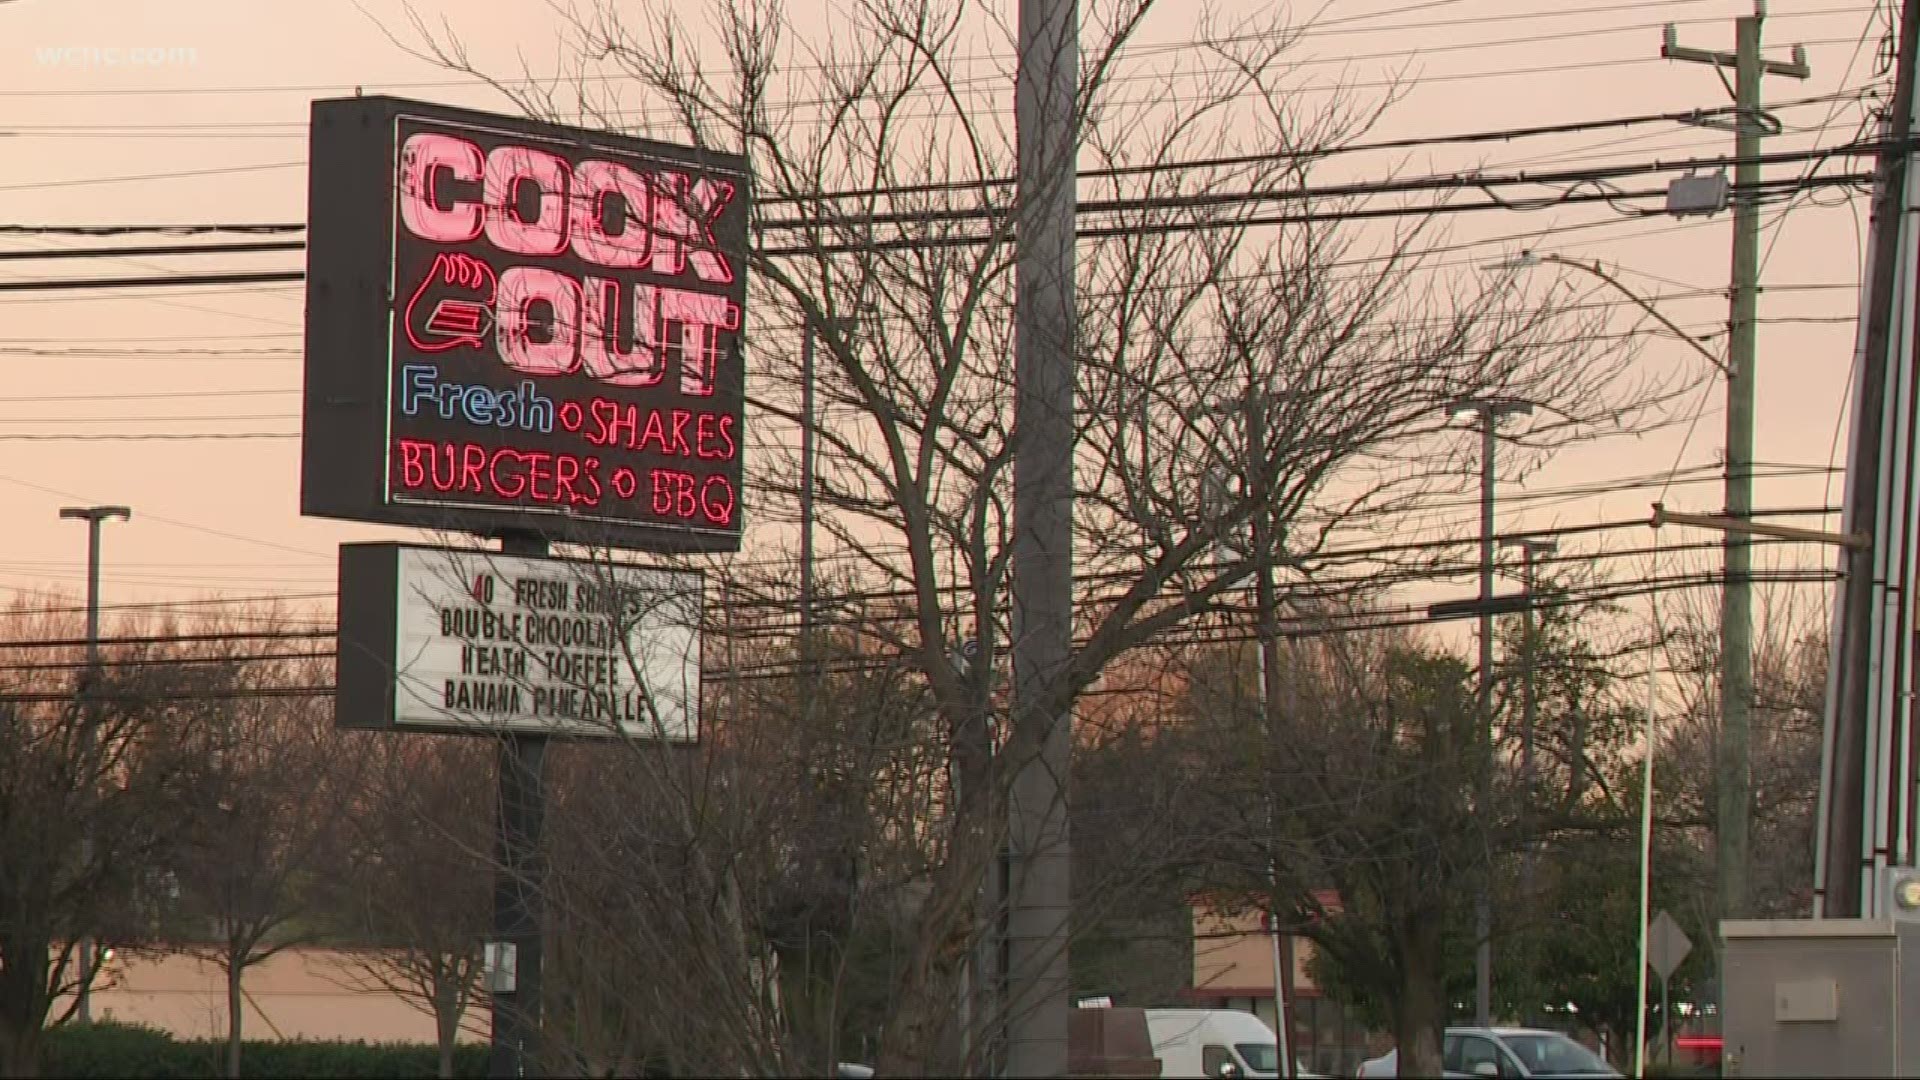 Detectives said the Cookout on Albemarle Road was robbed early Friday morning by a man with a handgun.